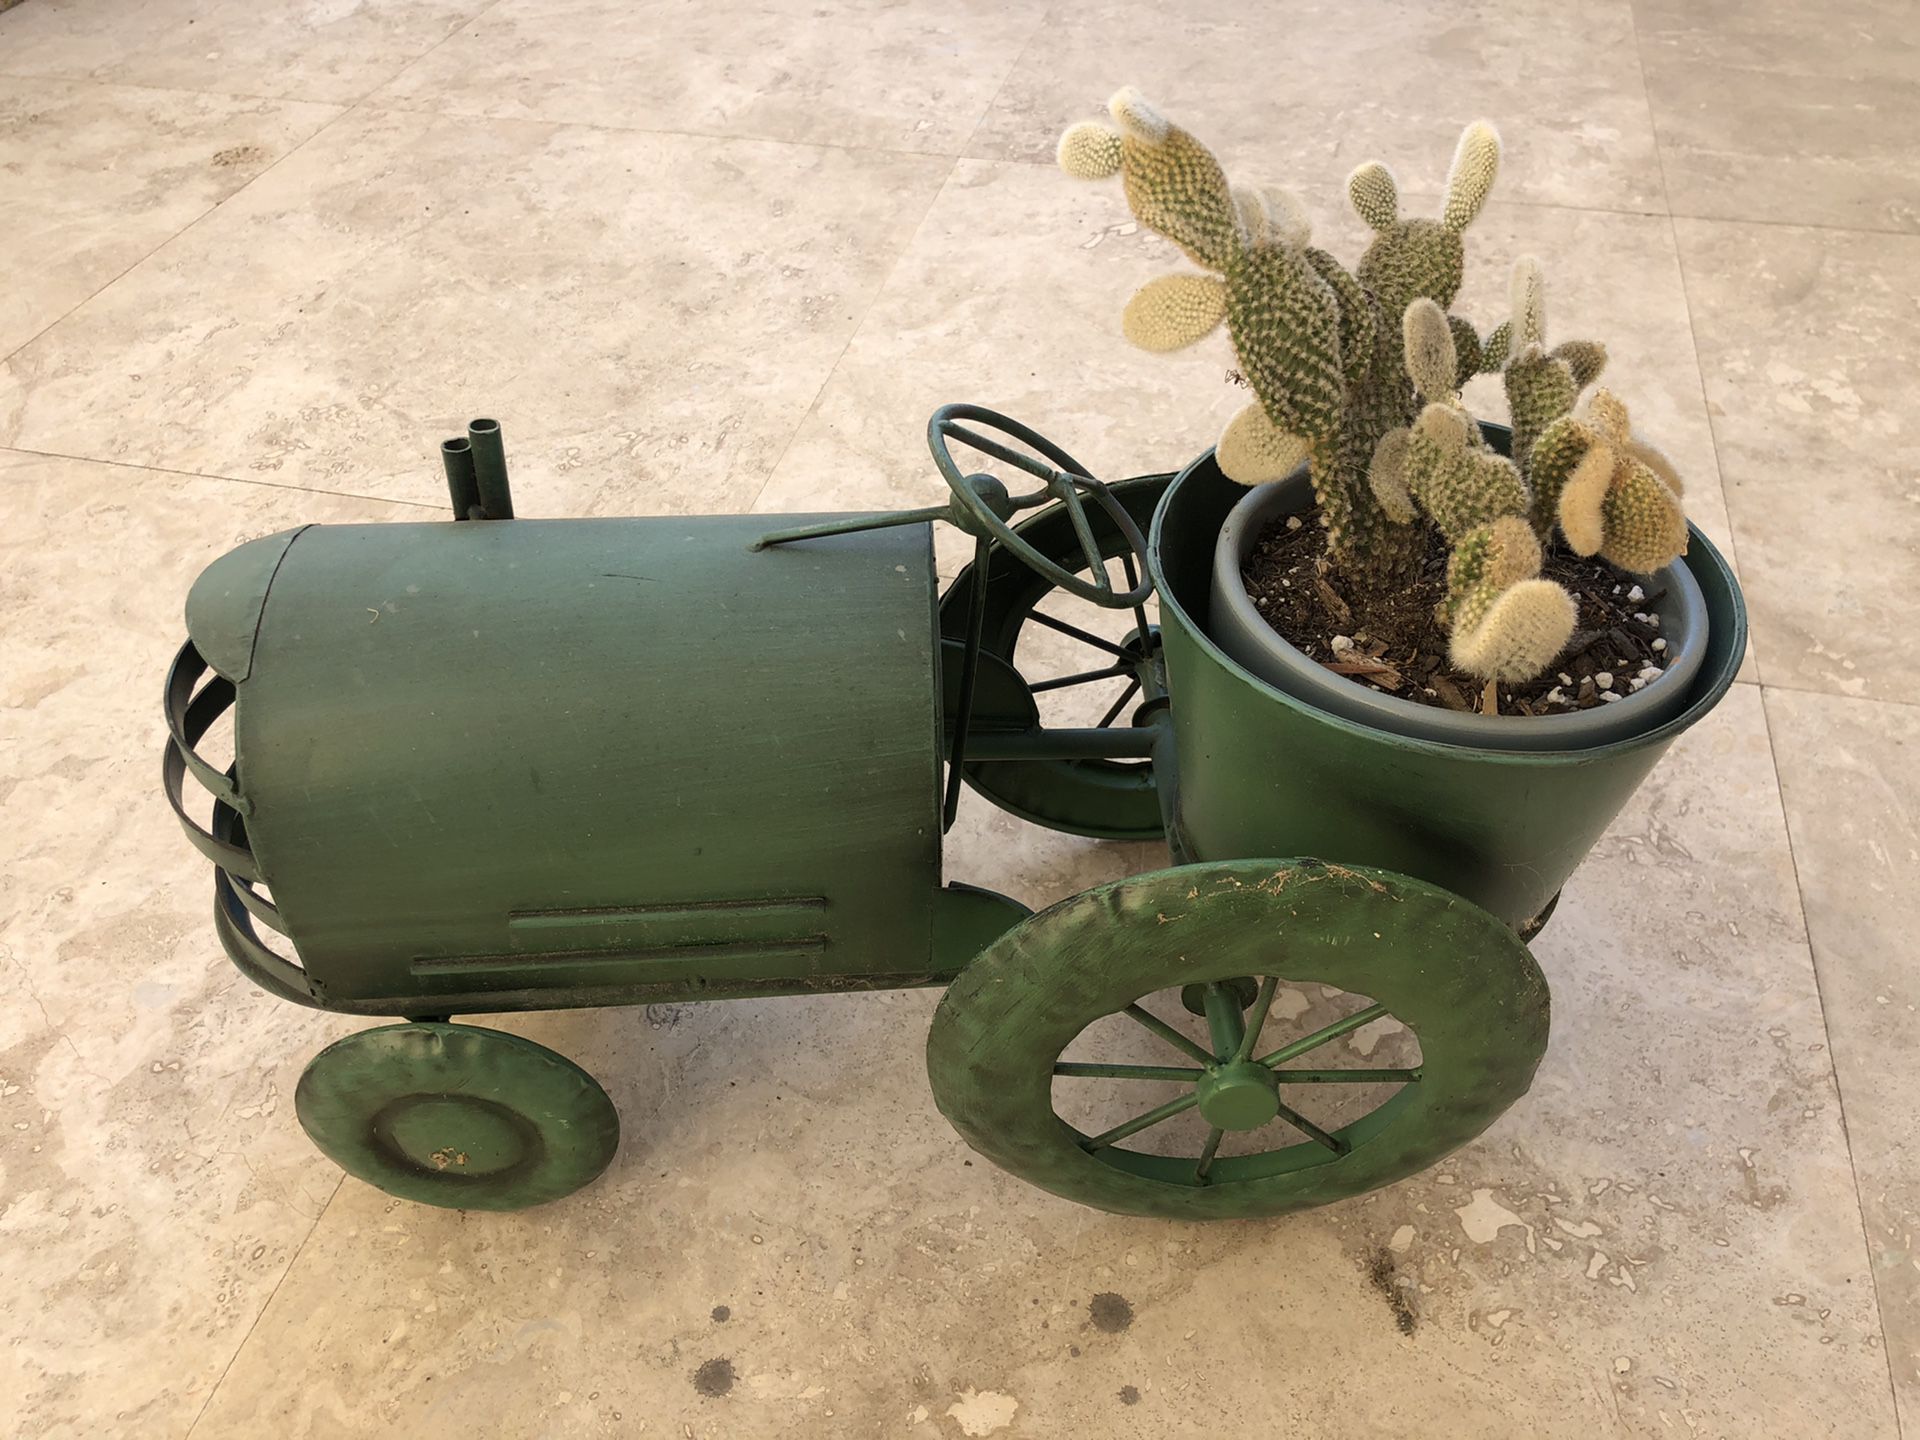 Yard decor - Tractor with live cactus